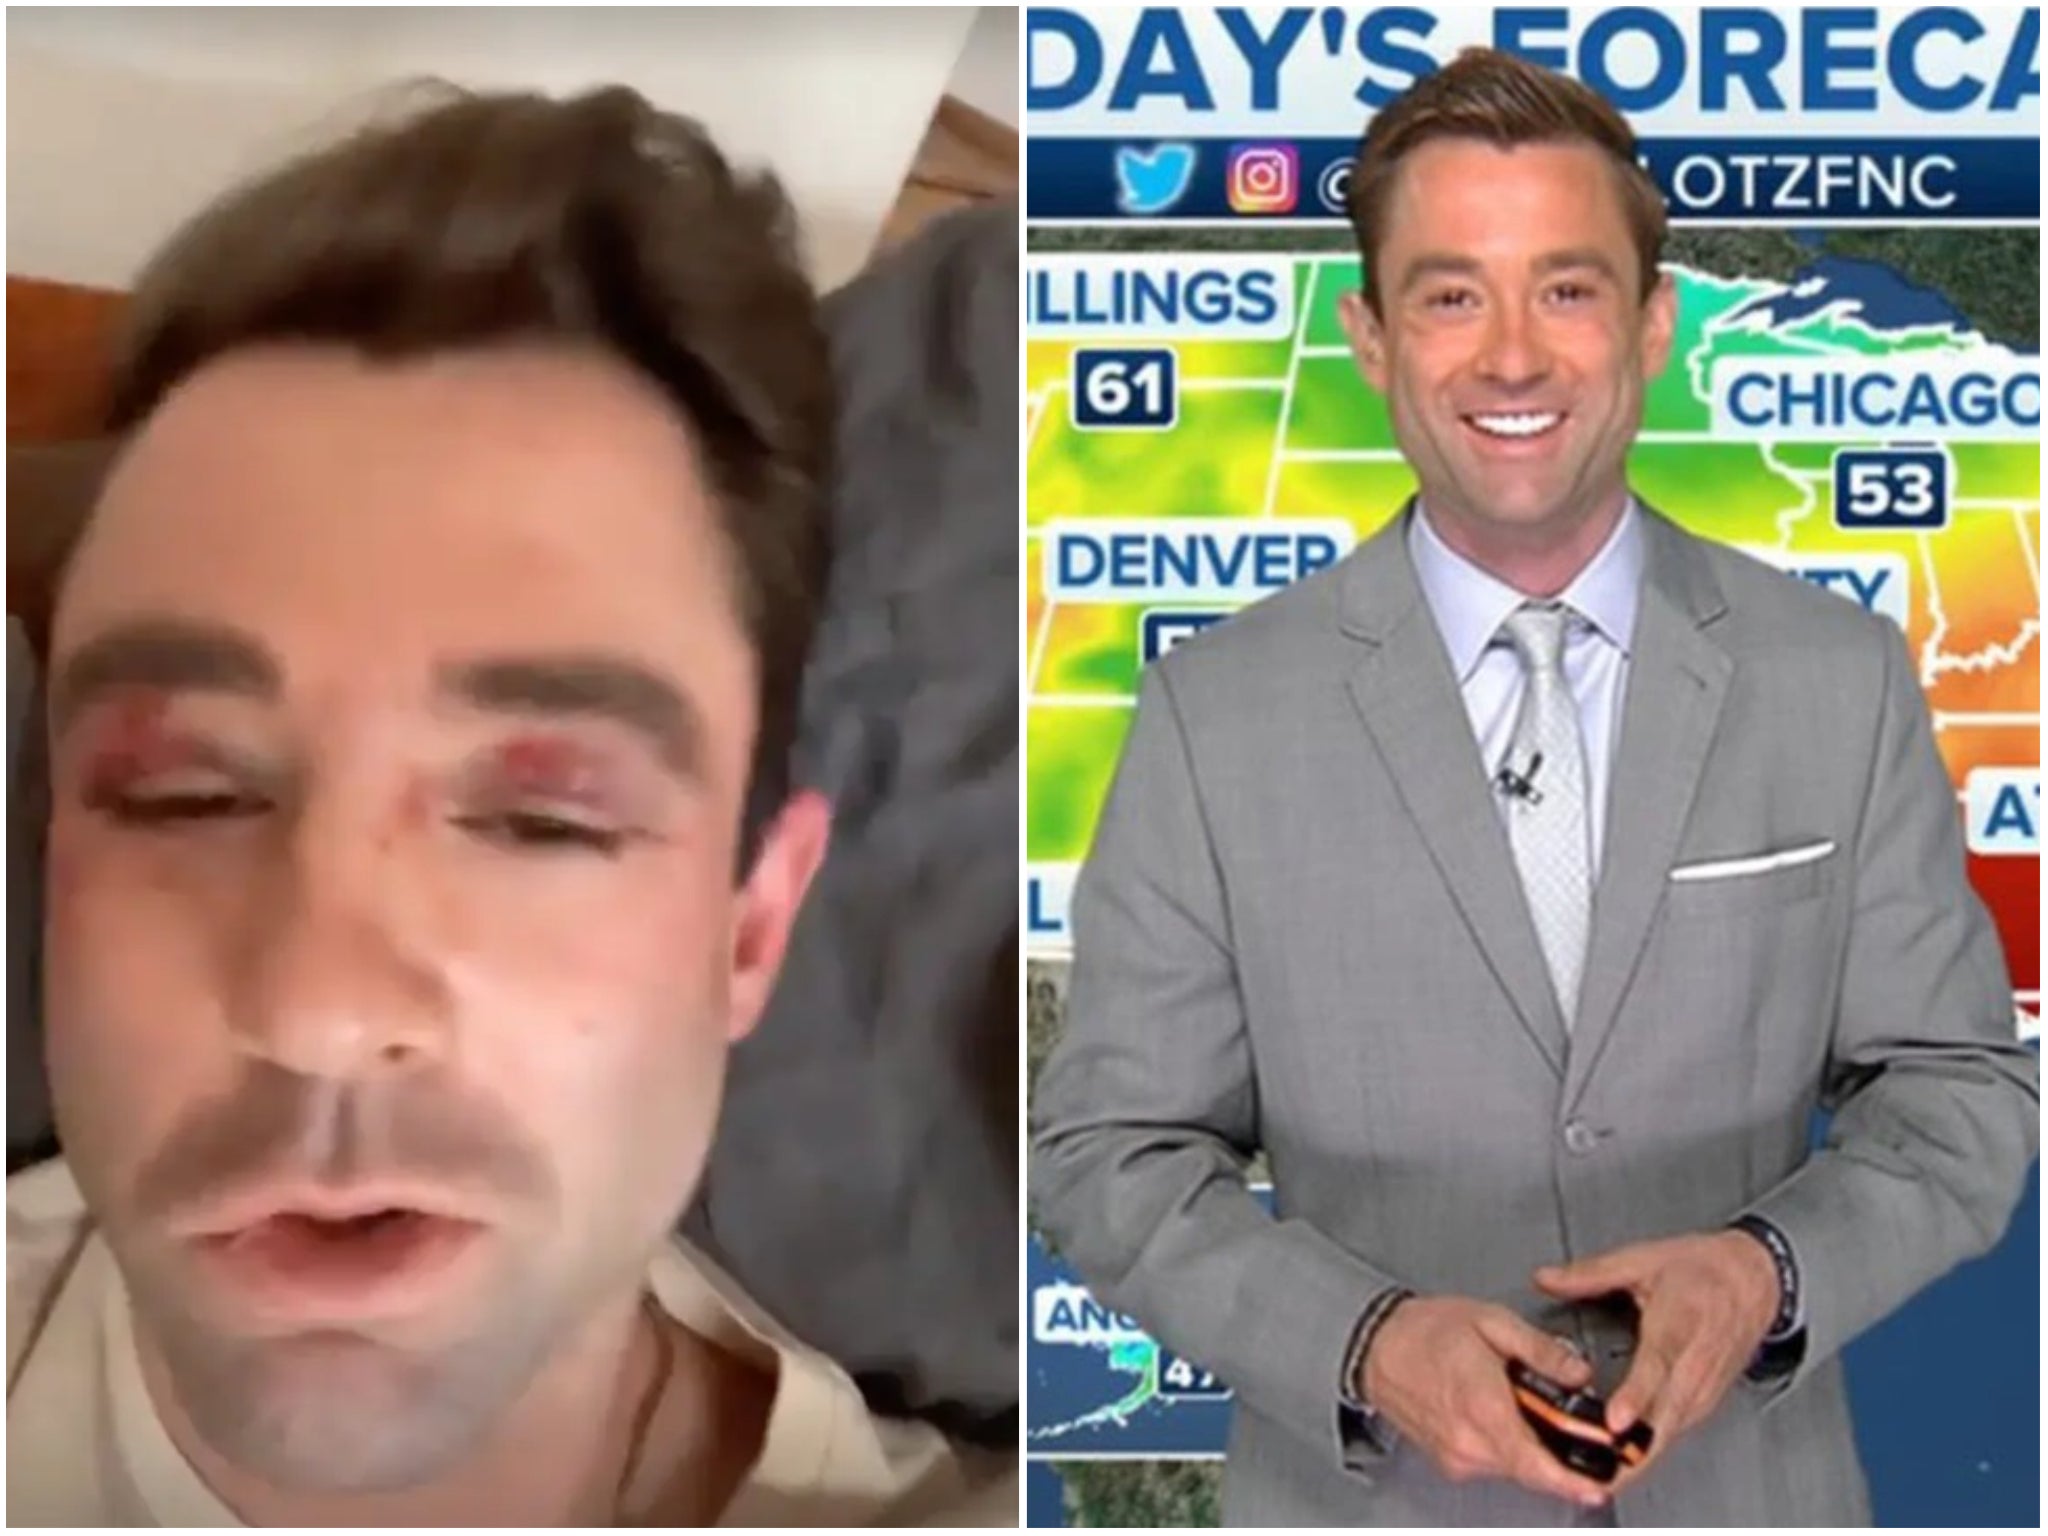 Fox News weatherman Adam Klotz, 37, said he was assaulted by a group of teenagers on the New York Subway